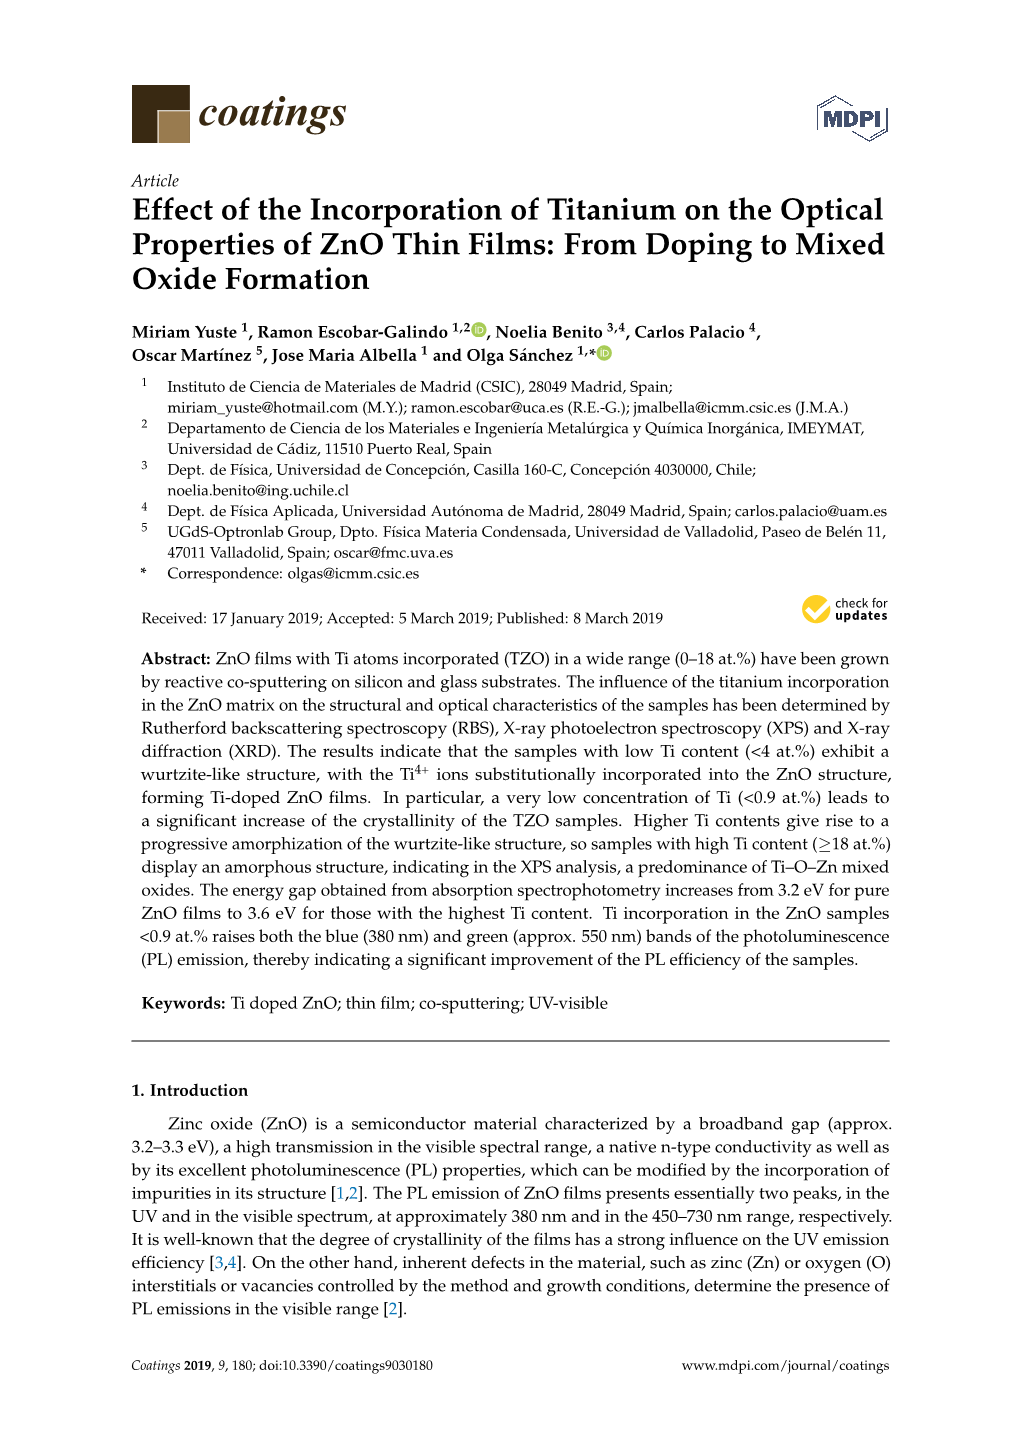 Effect of the Incorporation of Titanium on the Optical Properties of Zno Thin Films: from Doping to Mixed Oxide Formation